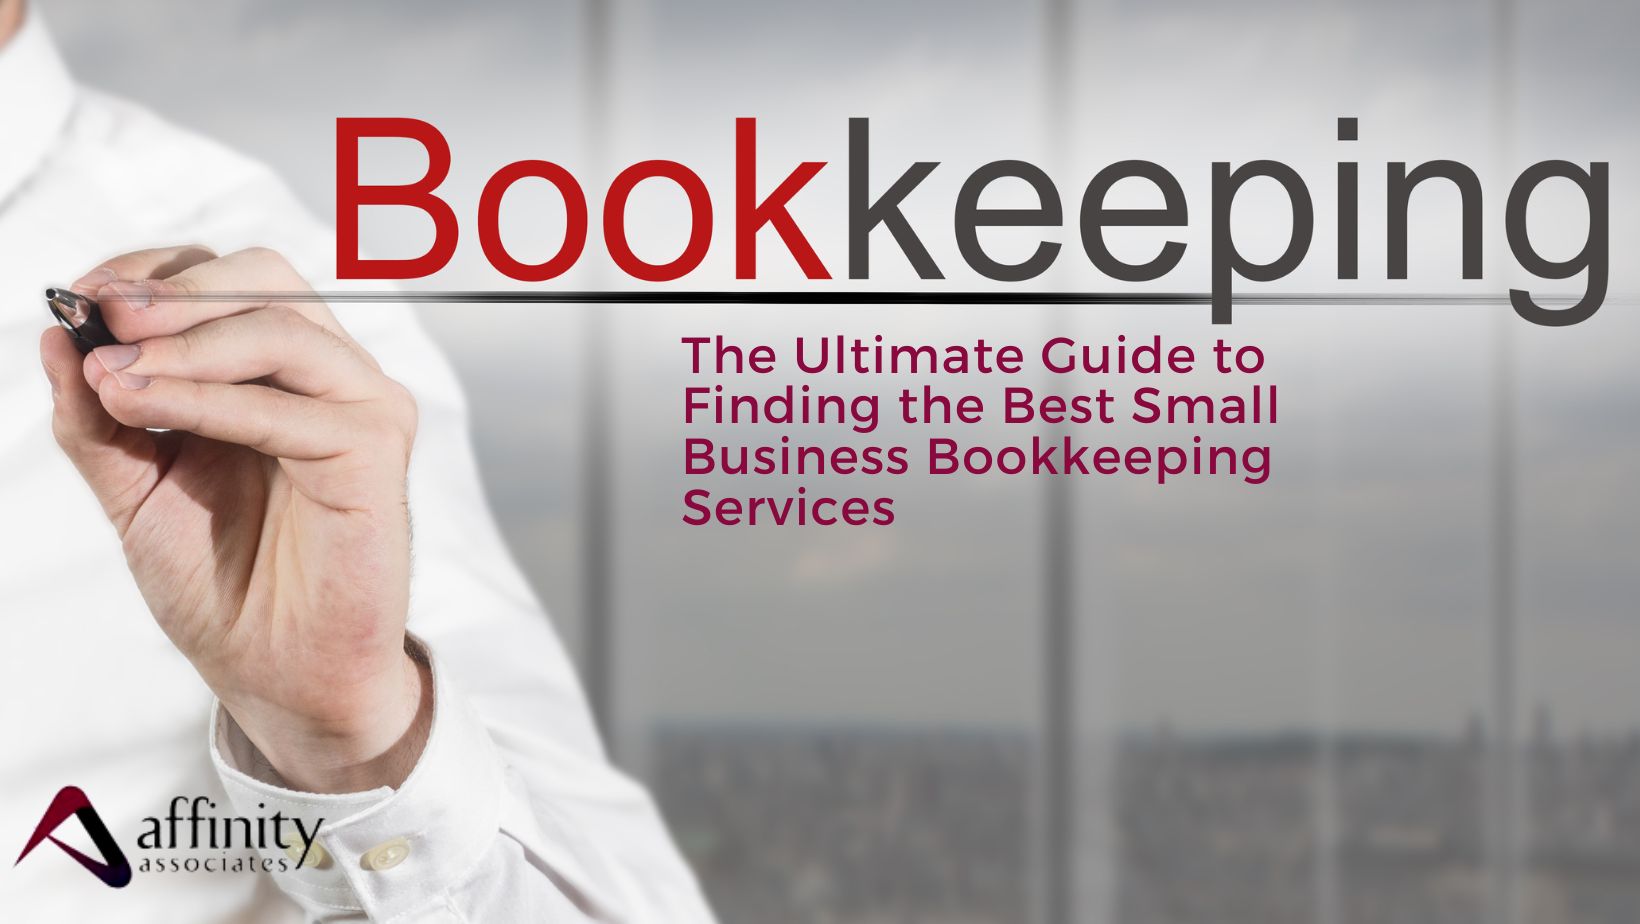 The Ultimate Guide to Finding the Best Small Business Bookkeeping Services